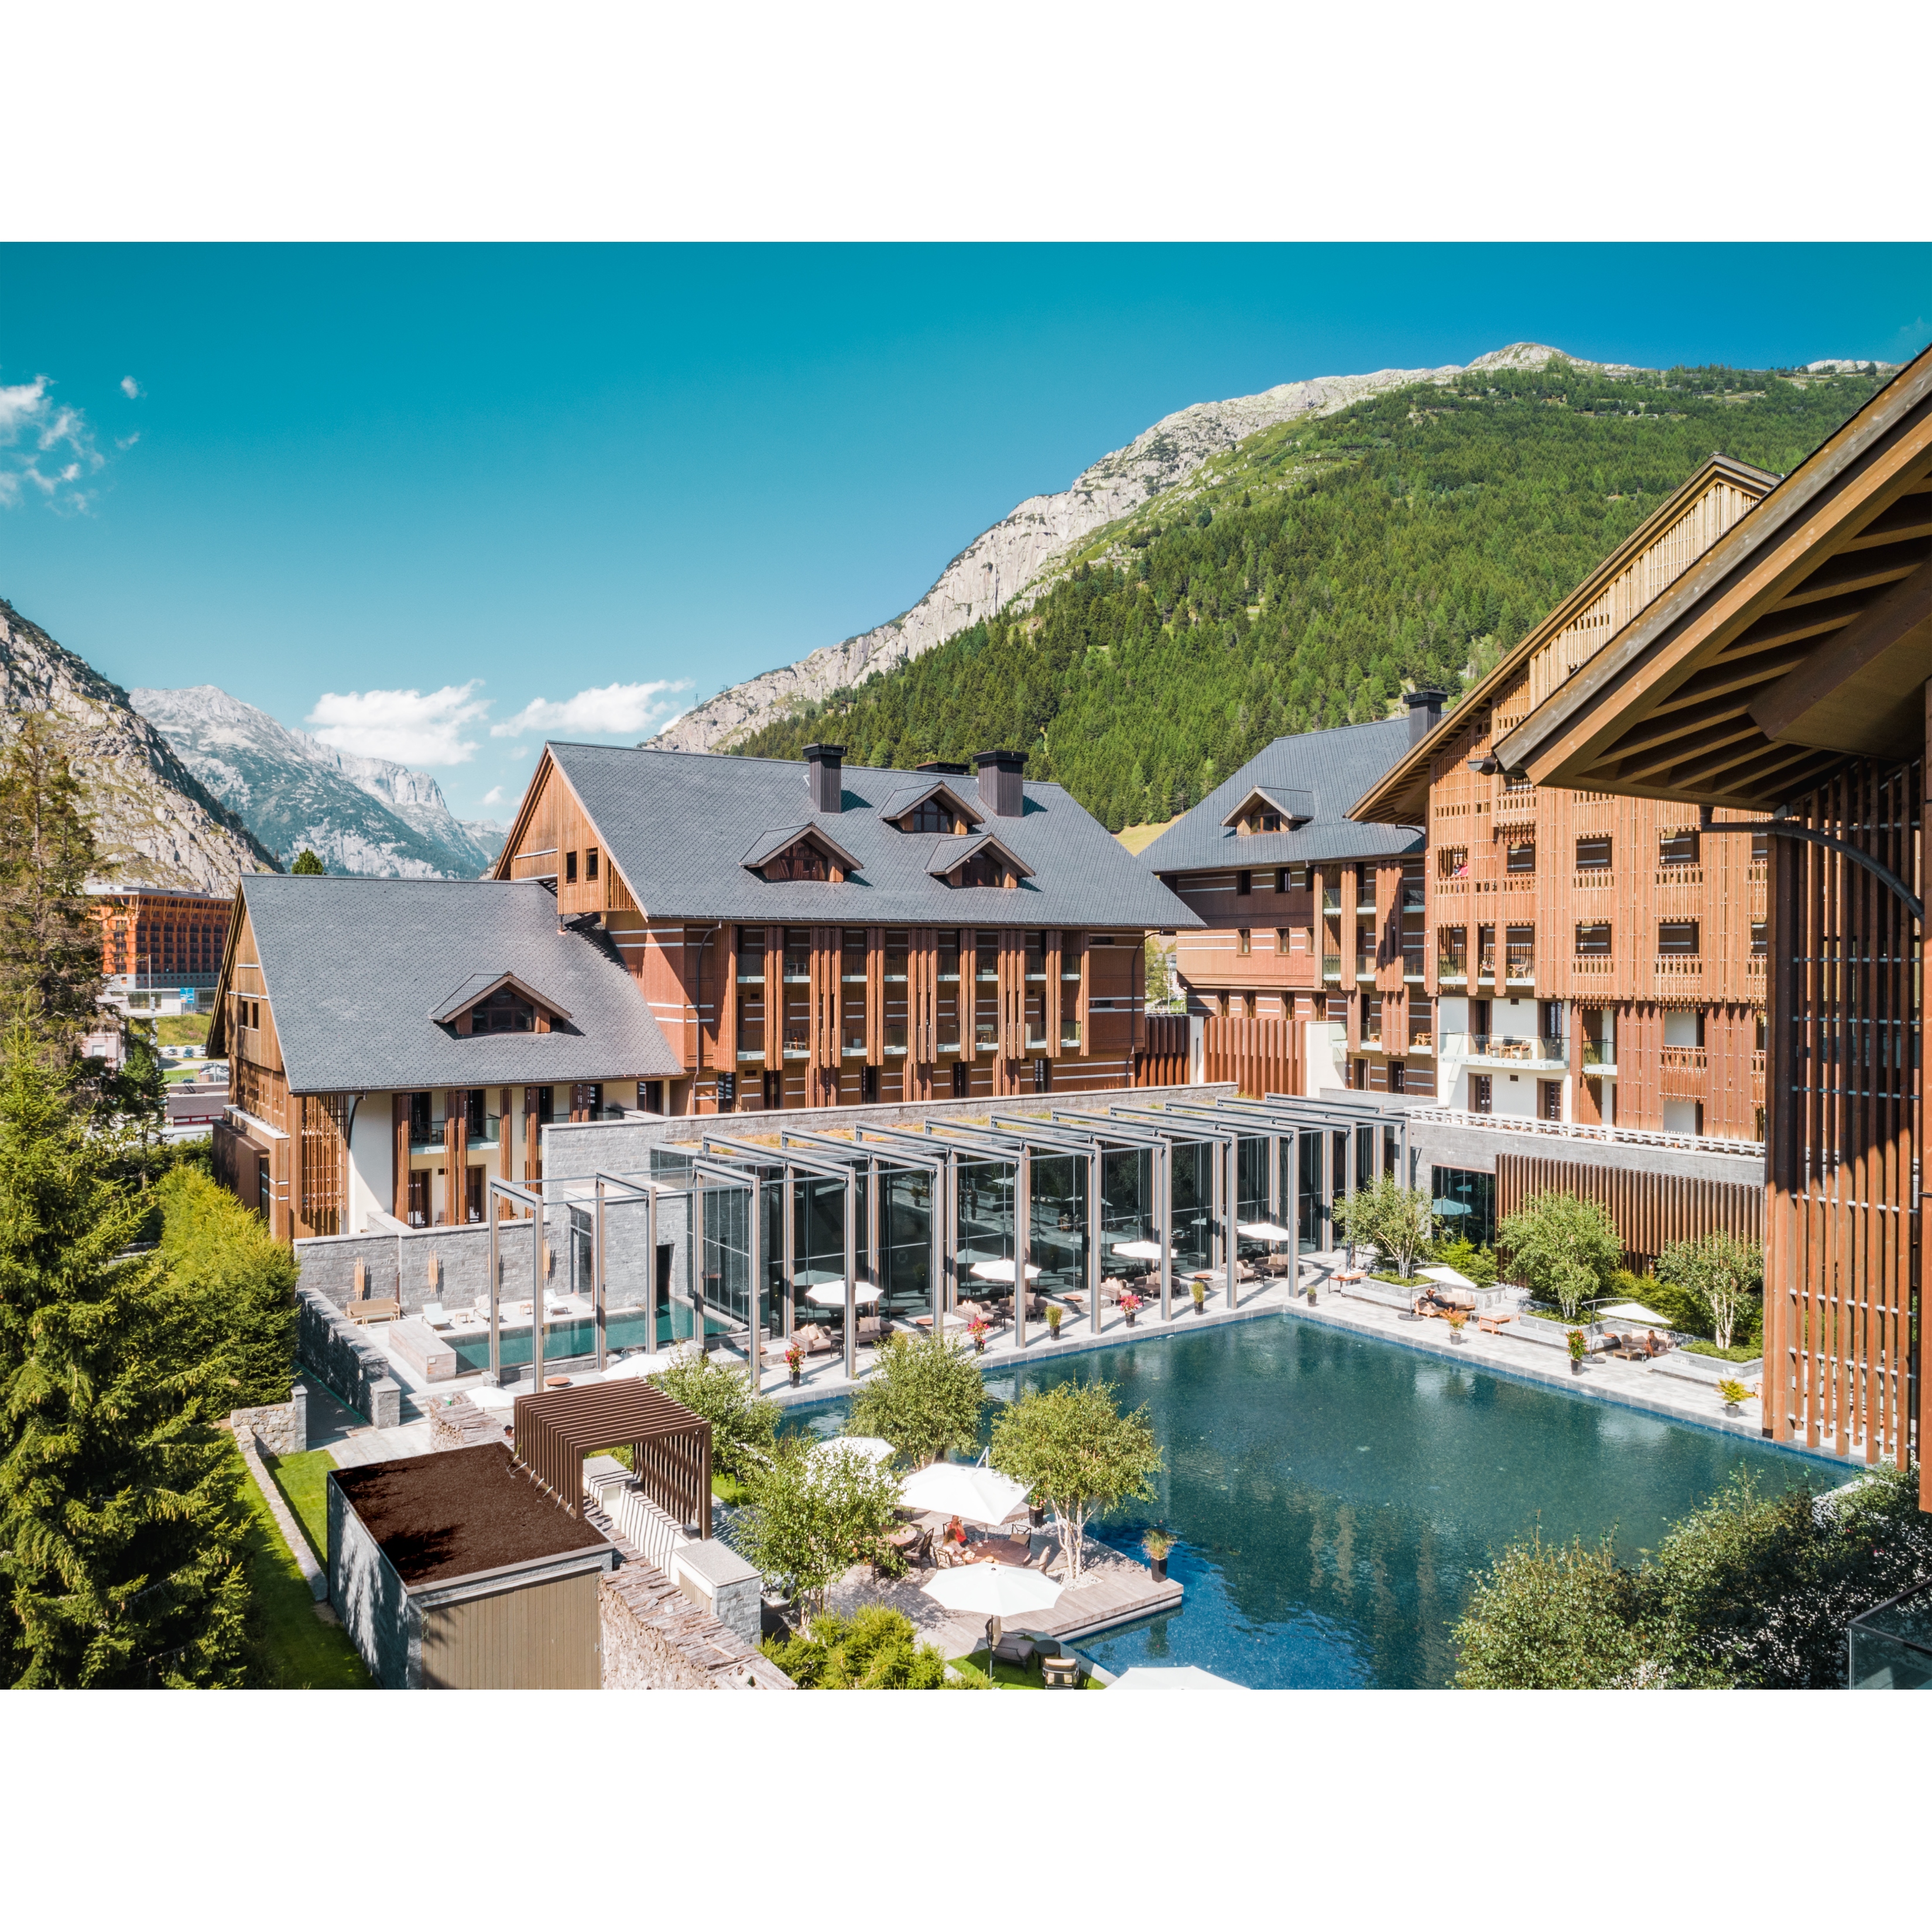 An Overview For the Chedi Andermatt Courtyard